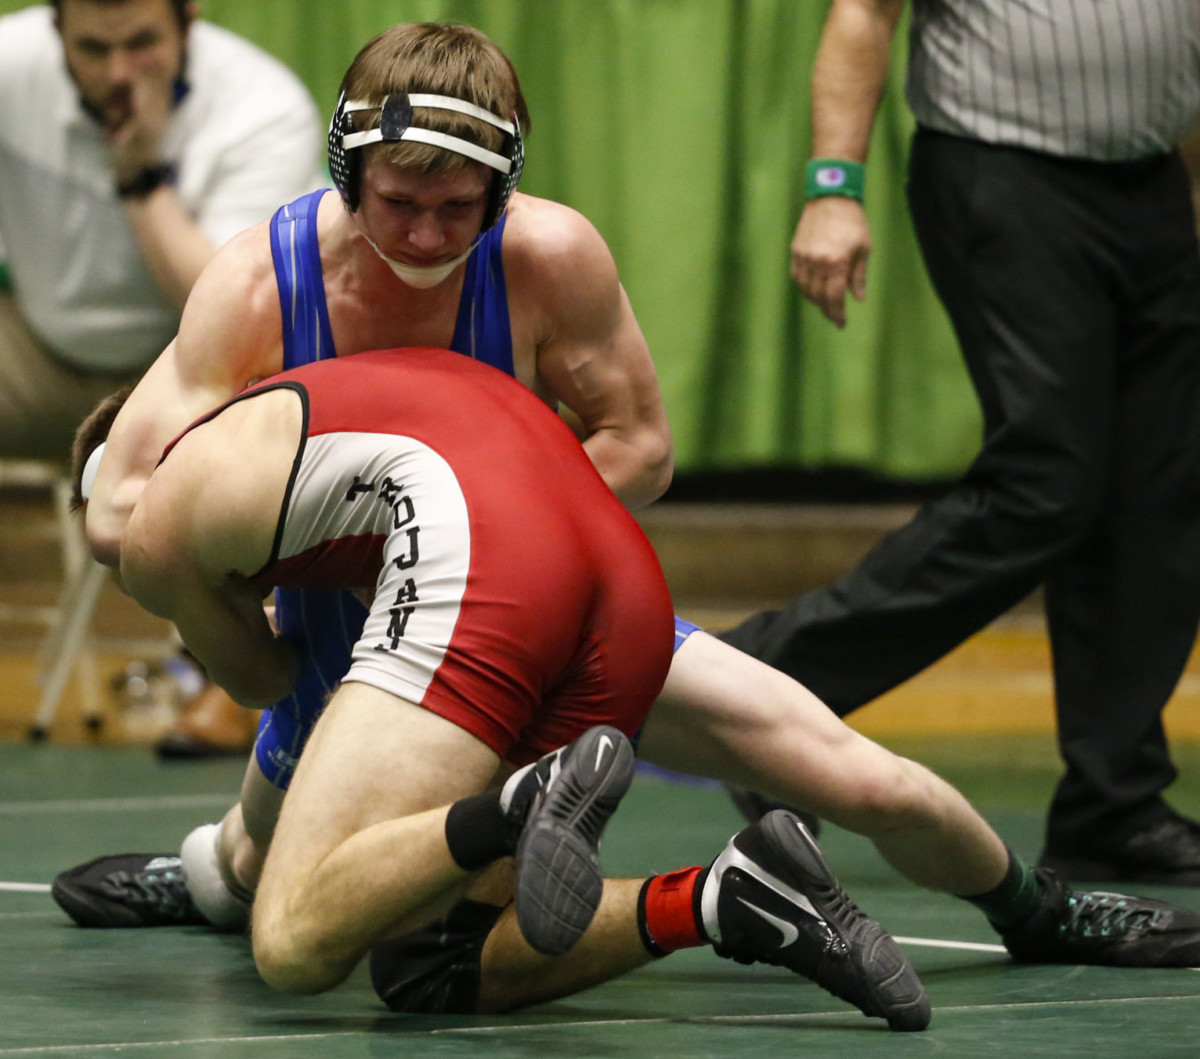 Eastern Hancock’s Avery Wills locks up with East Central’s Ben Wolf during their third-place match at the New Castle Semistate wrestling tournament on Saturday, Feb. 13, 2021. (Rob Baker/Daily Reporter)